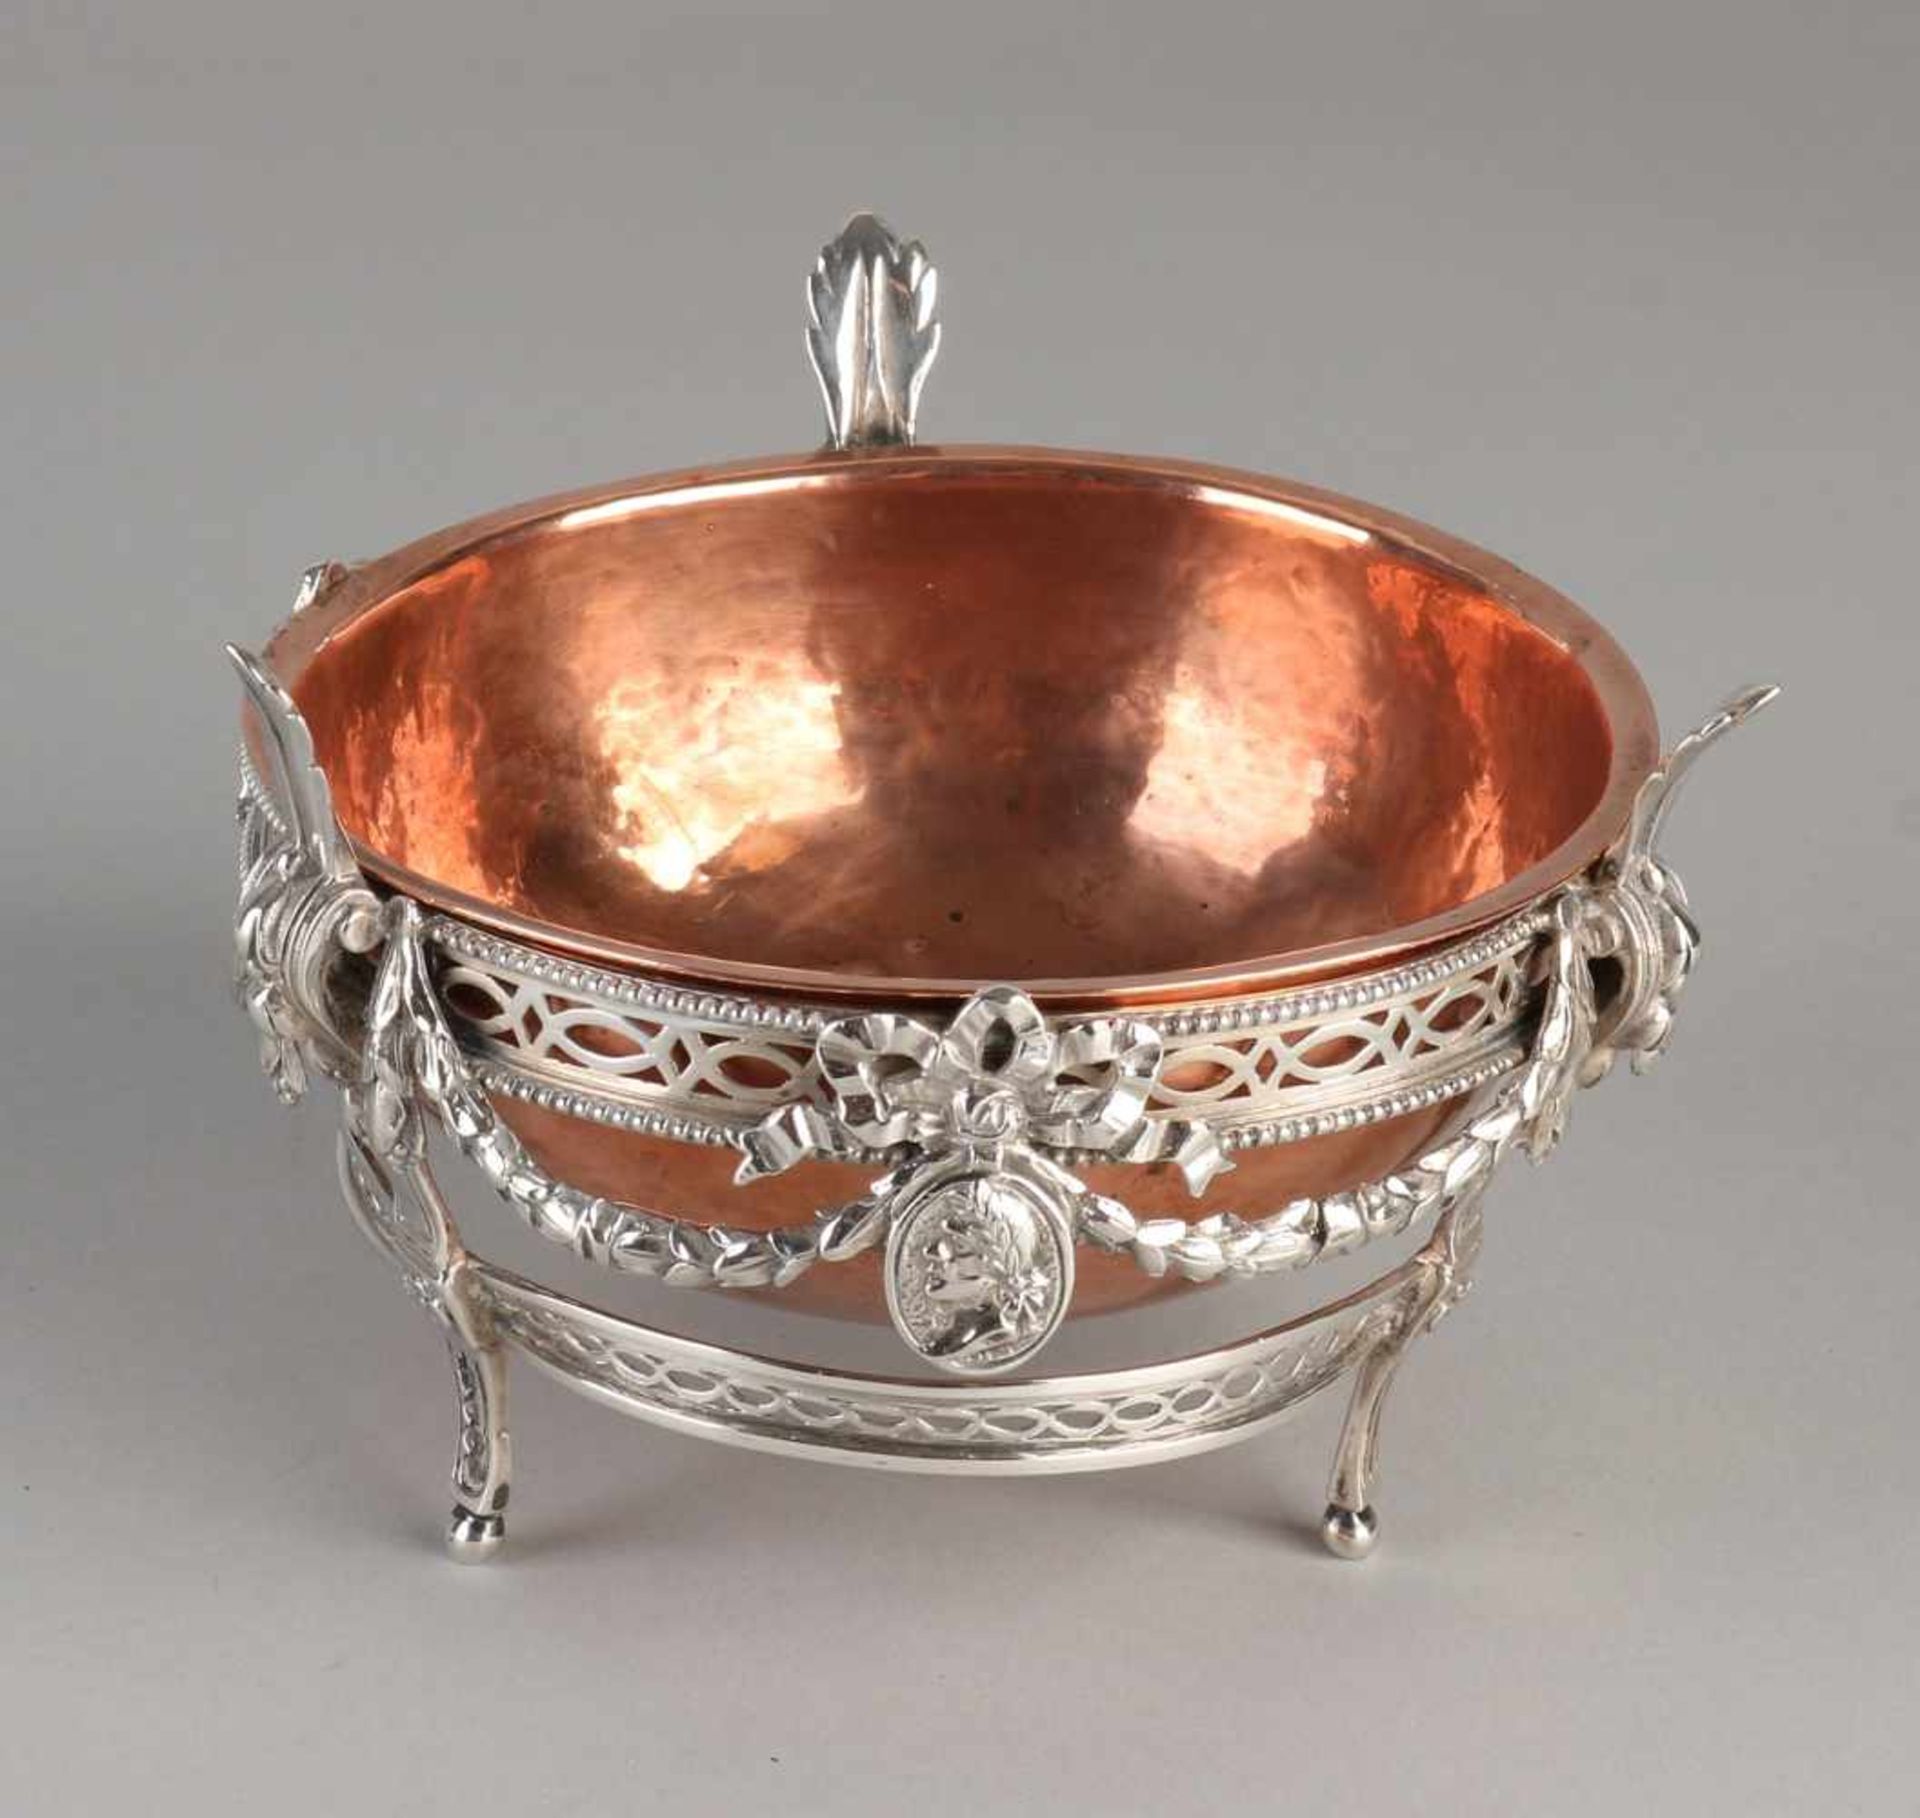 Copper pijpencomfoor in silver holder, 925/000, decorated with garlands, bows and medallions. Posted